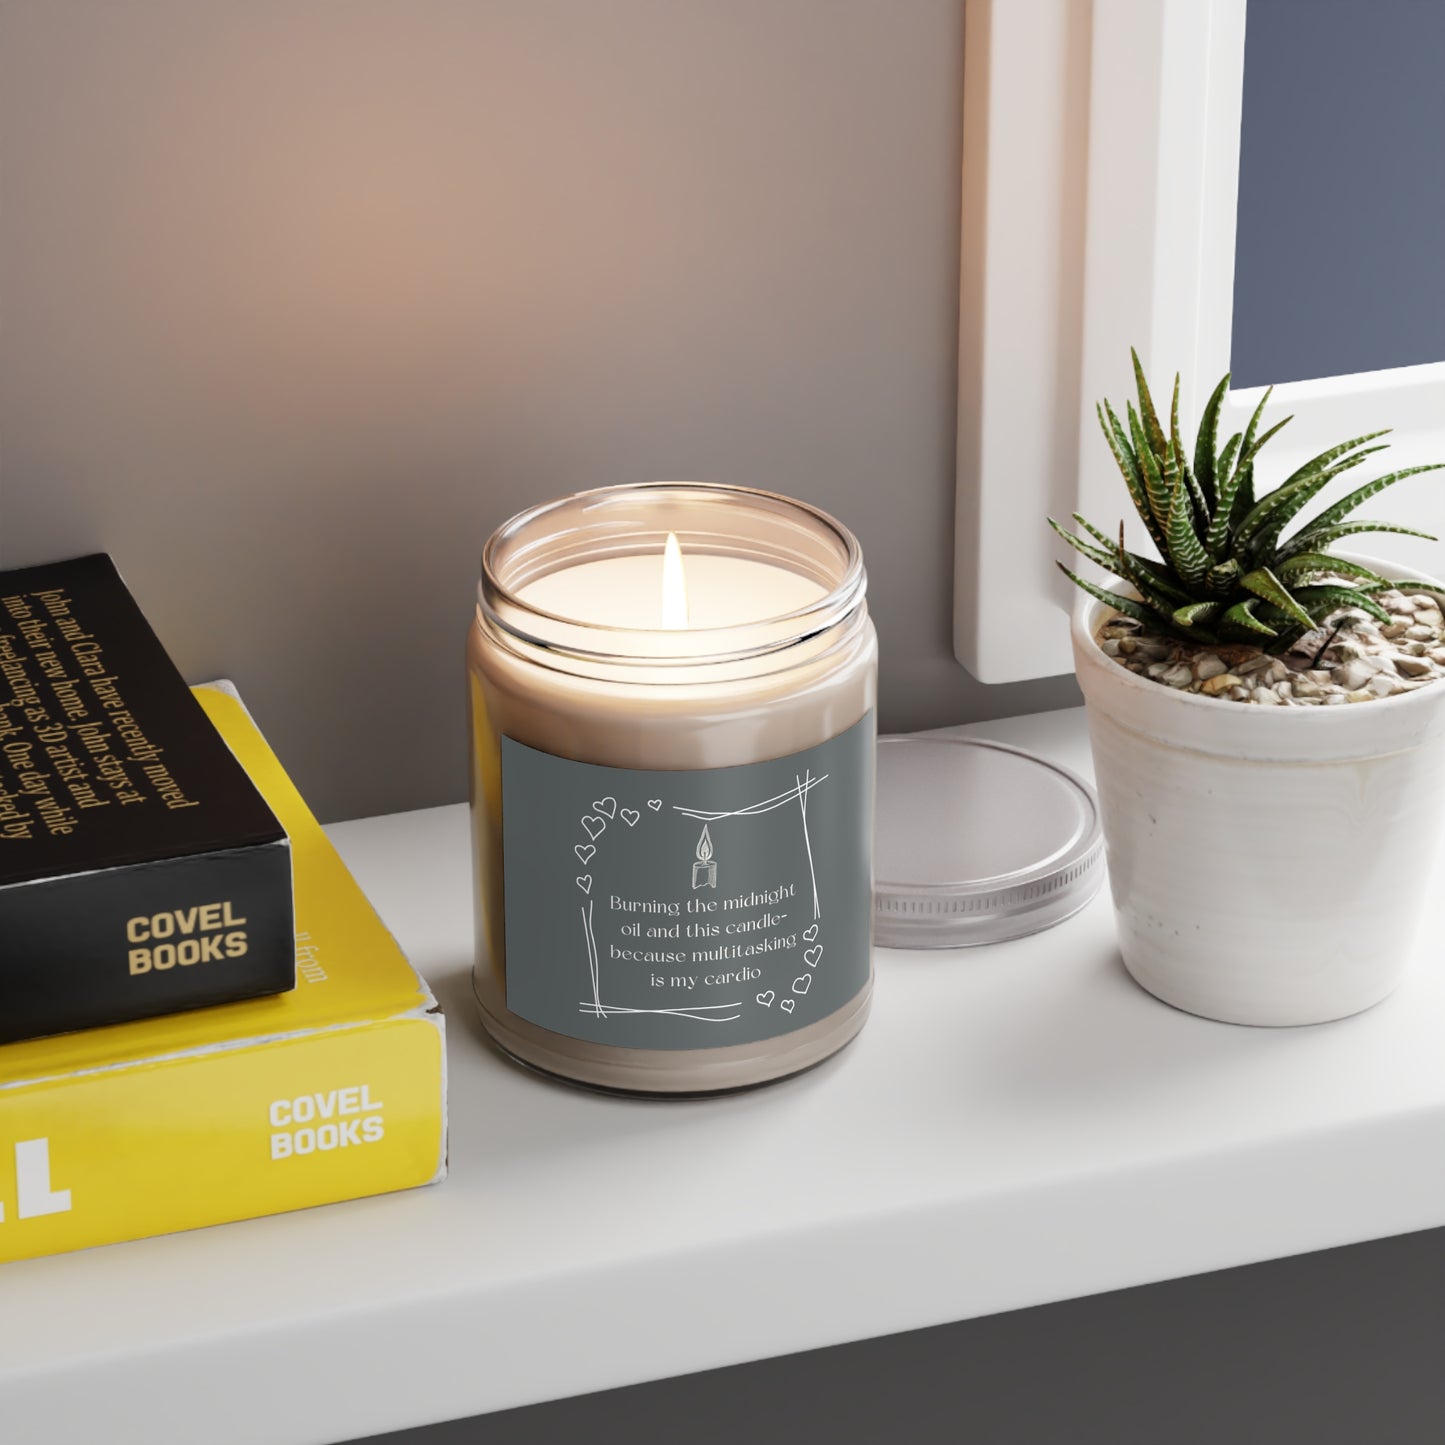 Burning the midnight oil and this candle—because multitasking is my cardio Scented Candles, 9oz